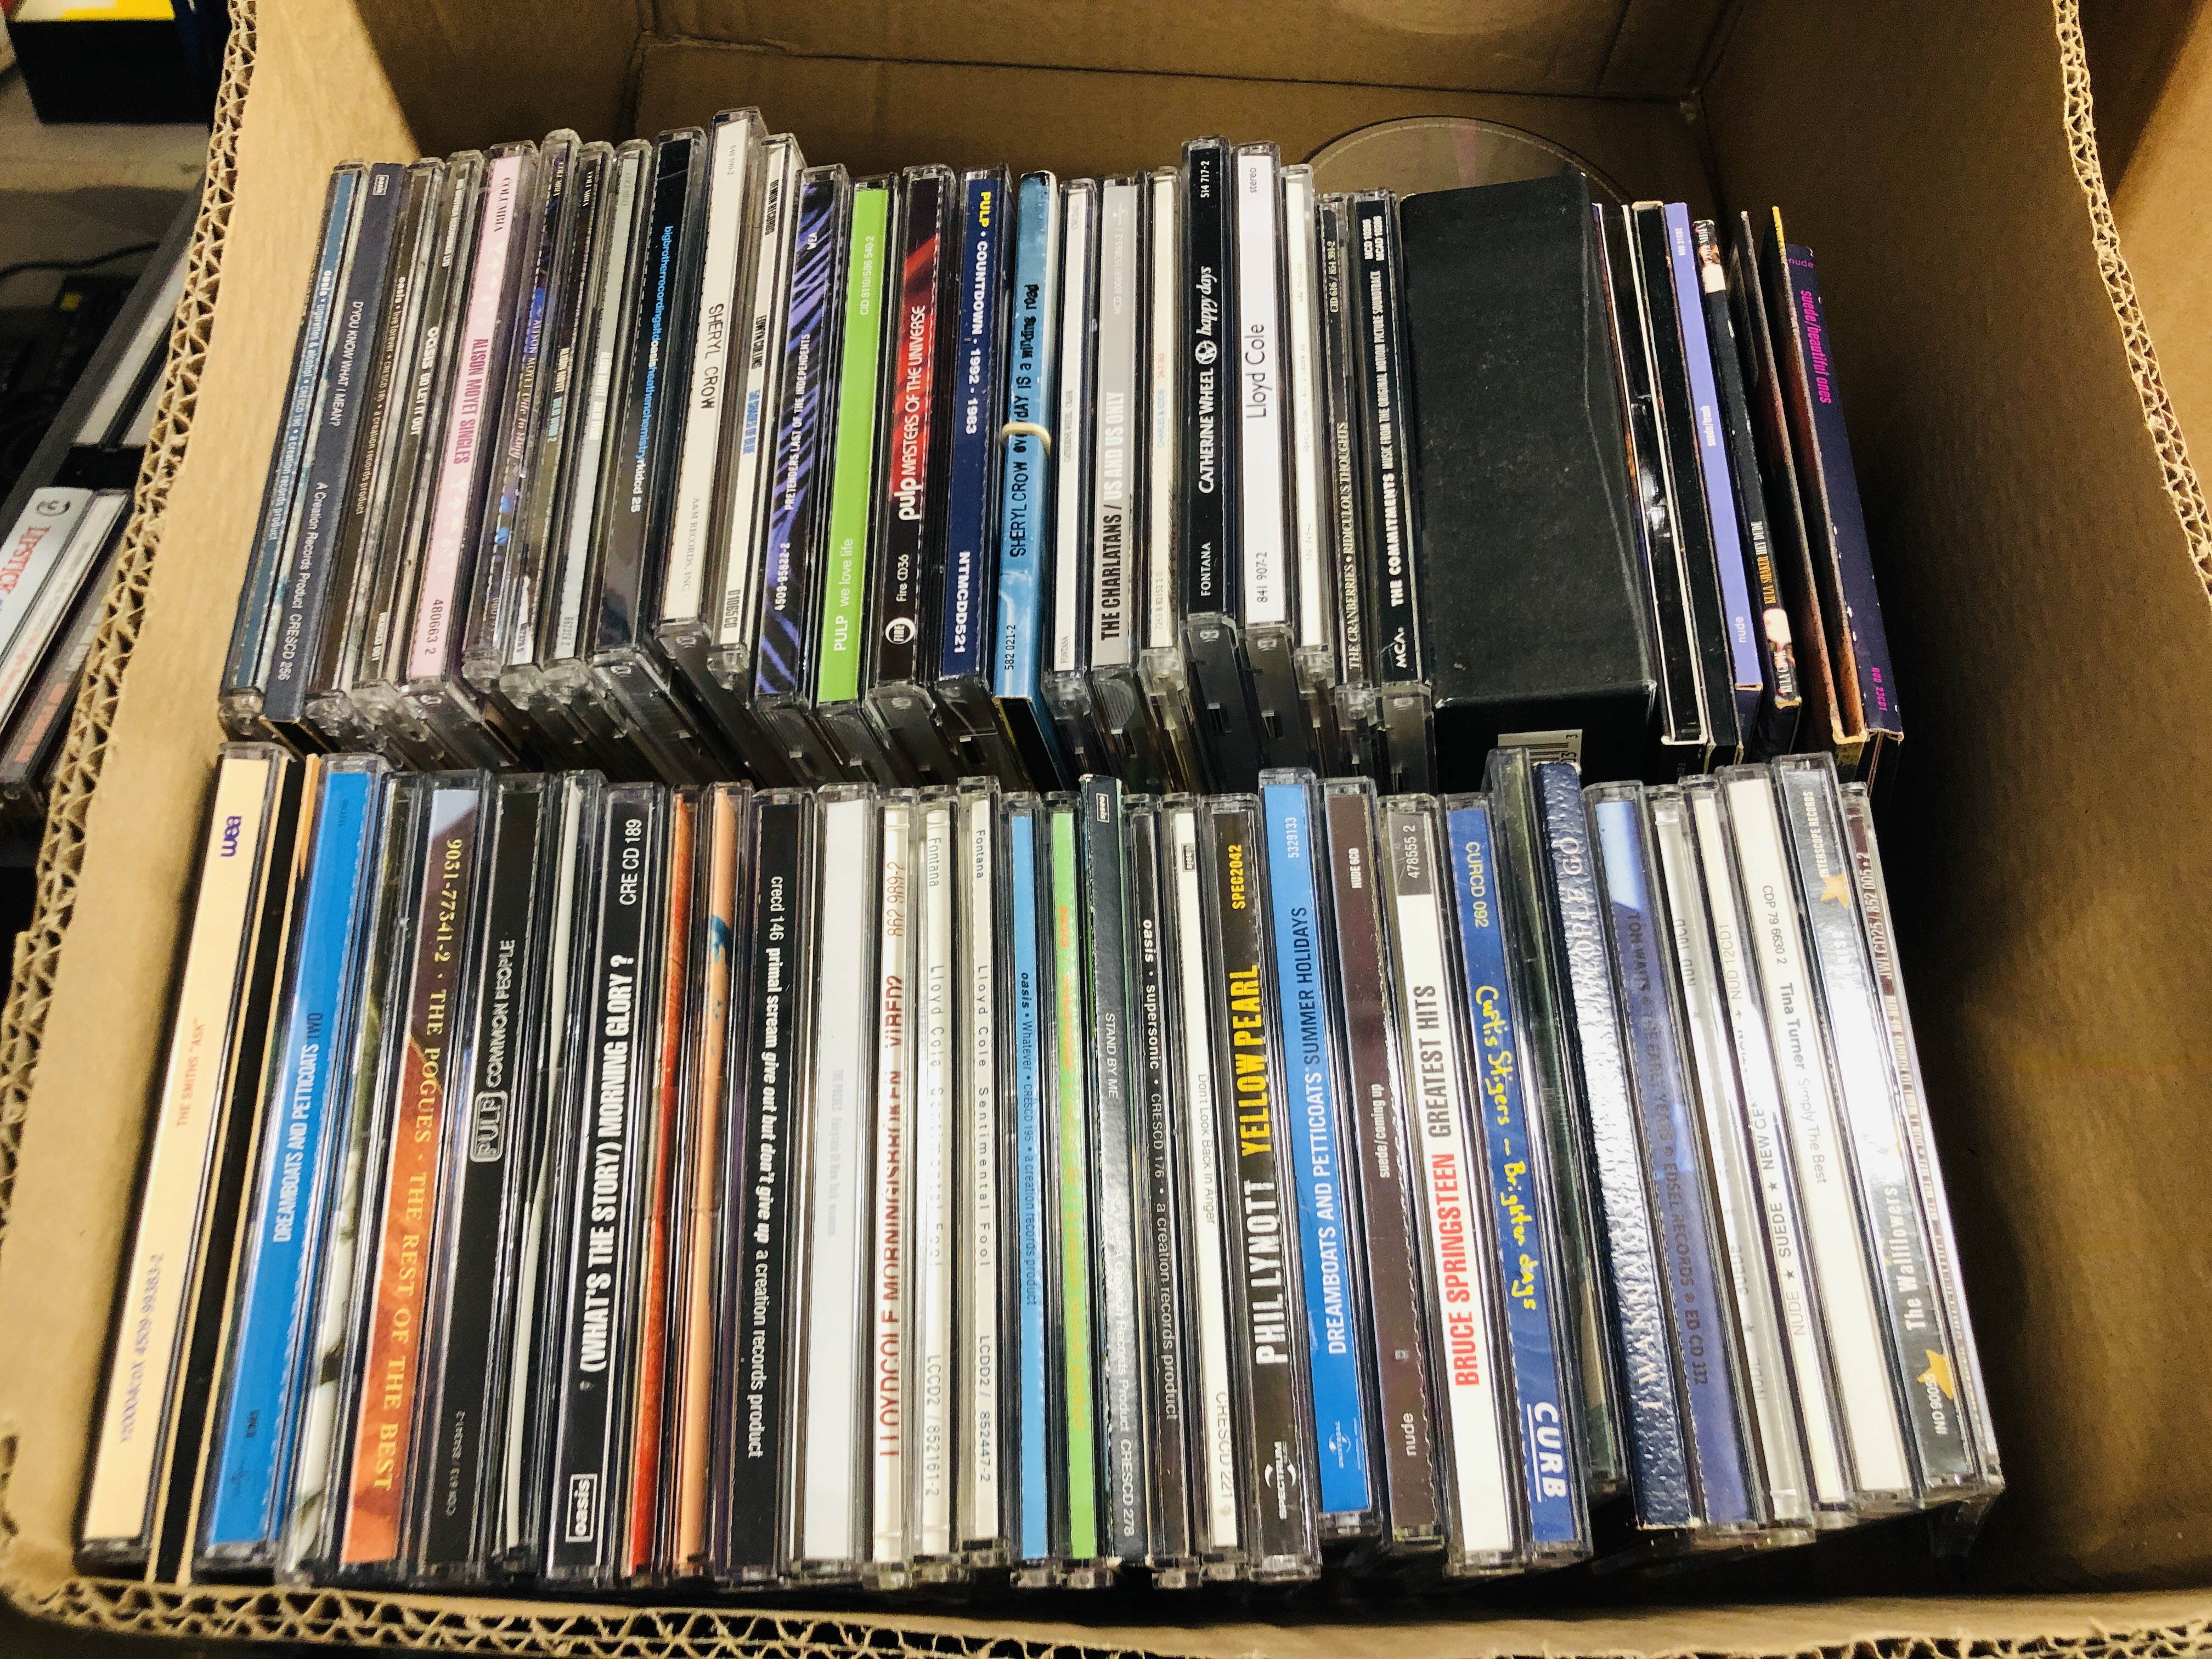 5 BOXES CONTAINING A COLLECTION OF APPROX 440 POPULAR MUSIC CD'S - Image 6 of 6